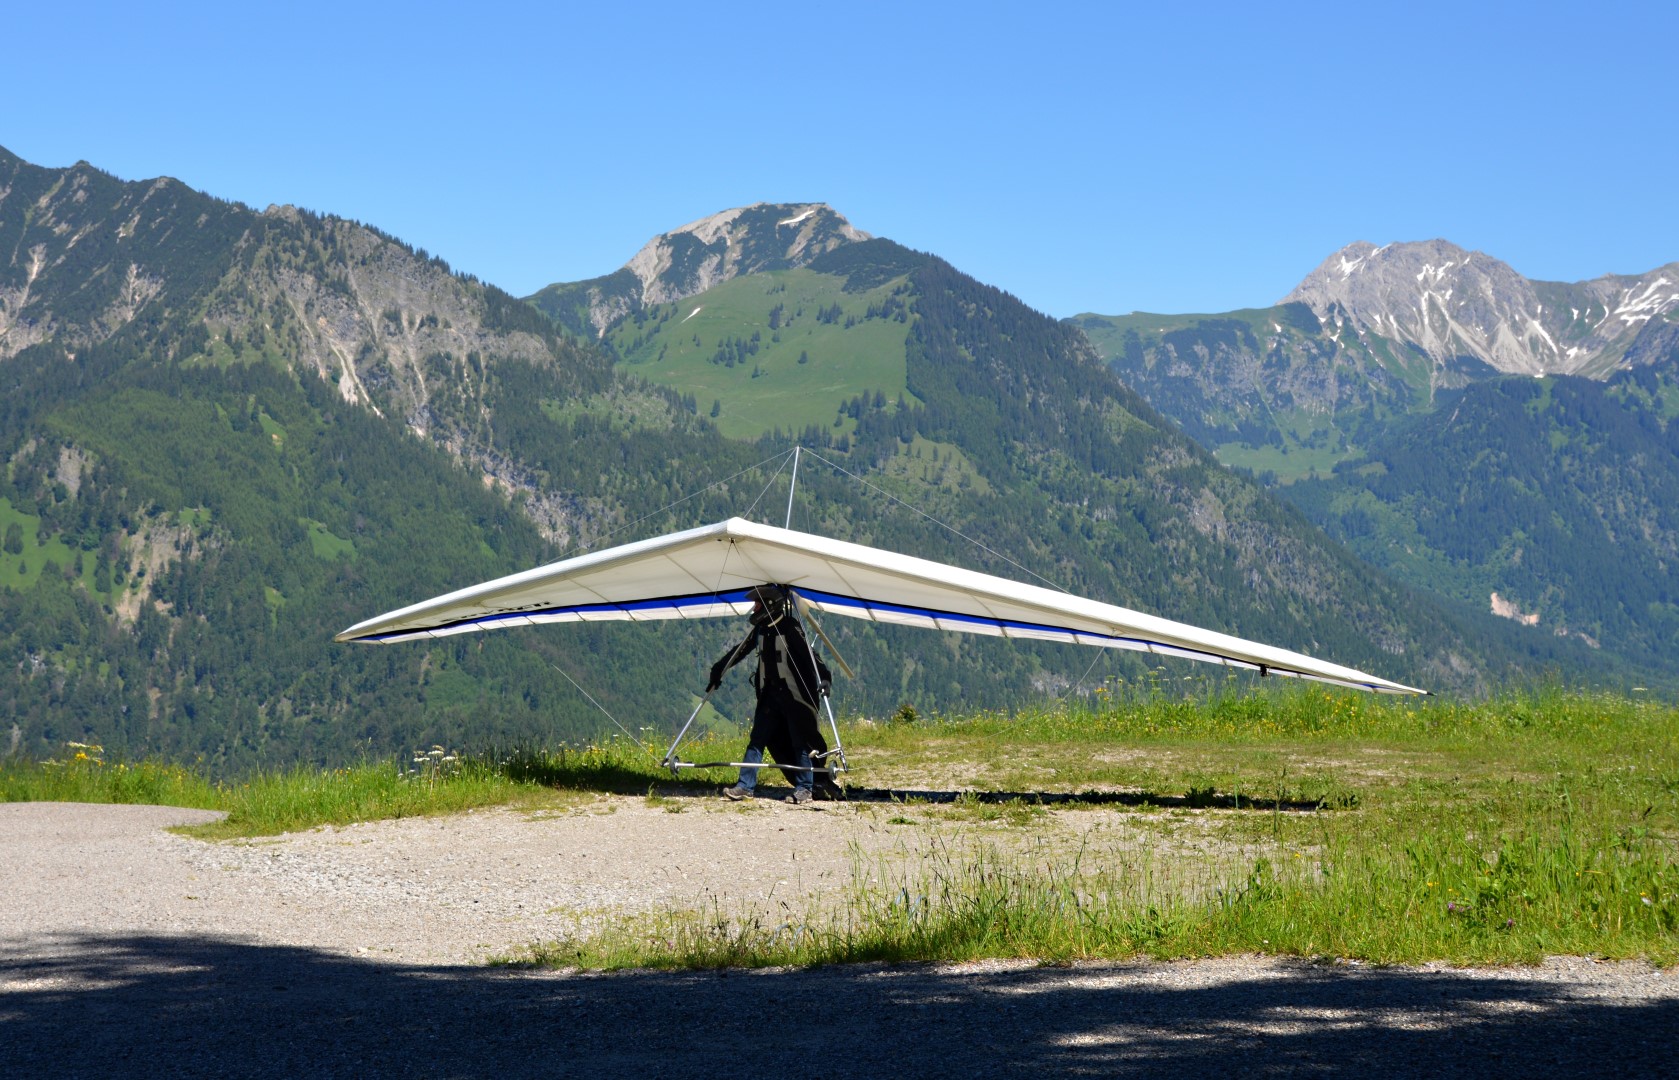 Where to experience the thrill of a hang gliding flight